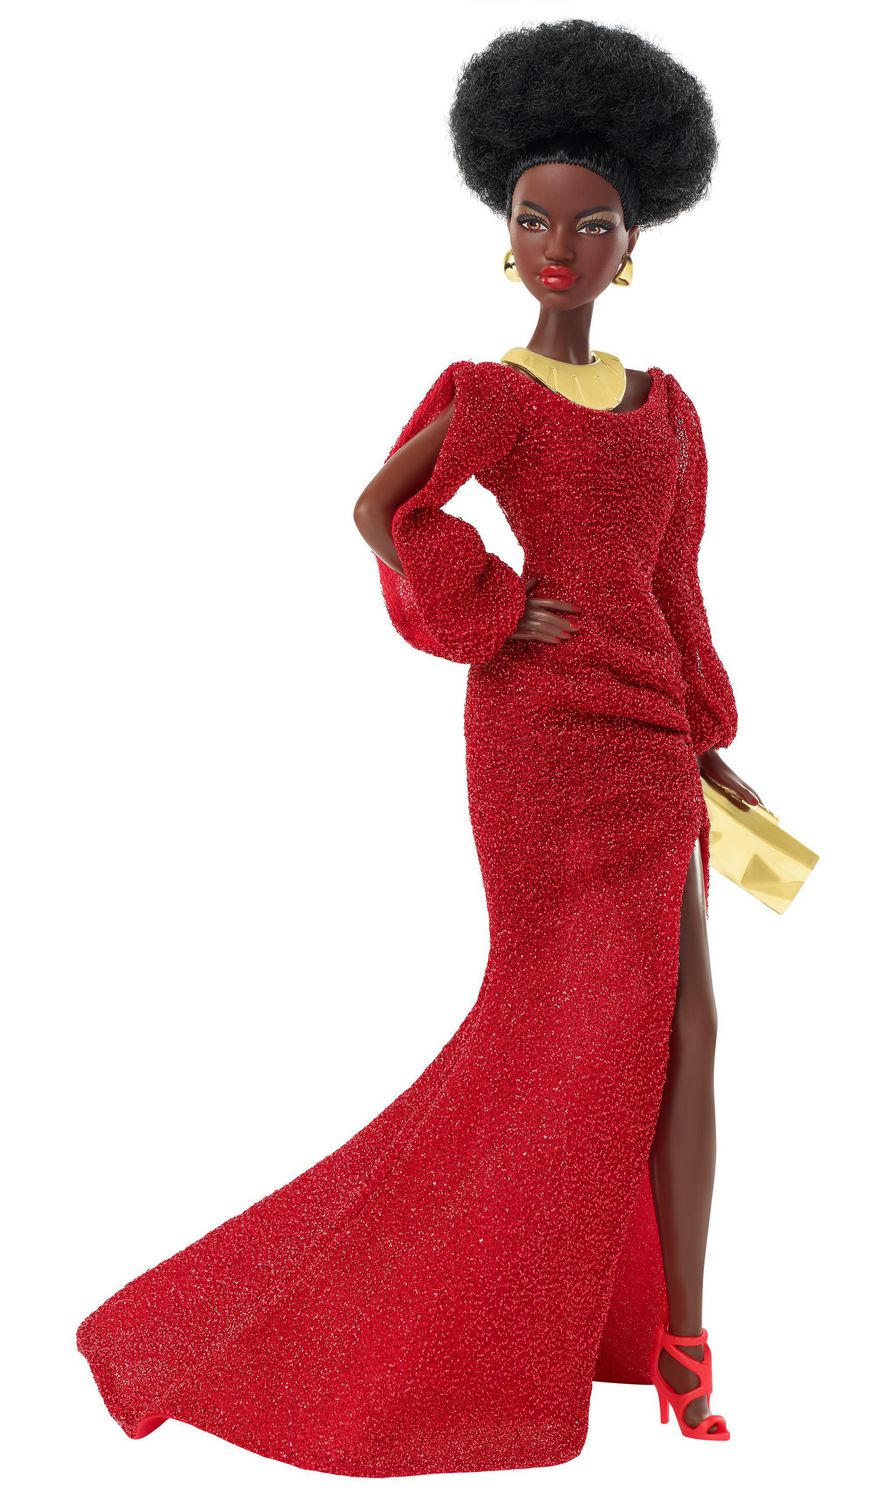 40th Anniversary First Black Barbie Doll Stores 